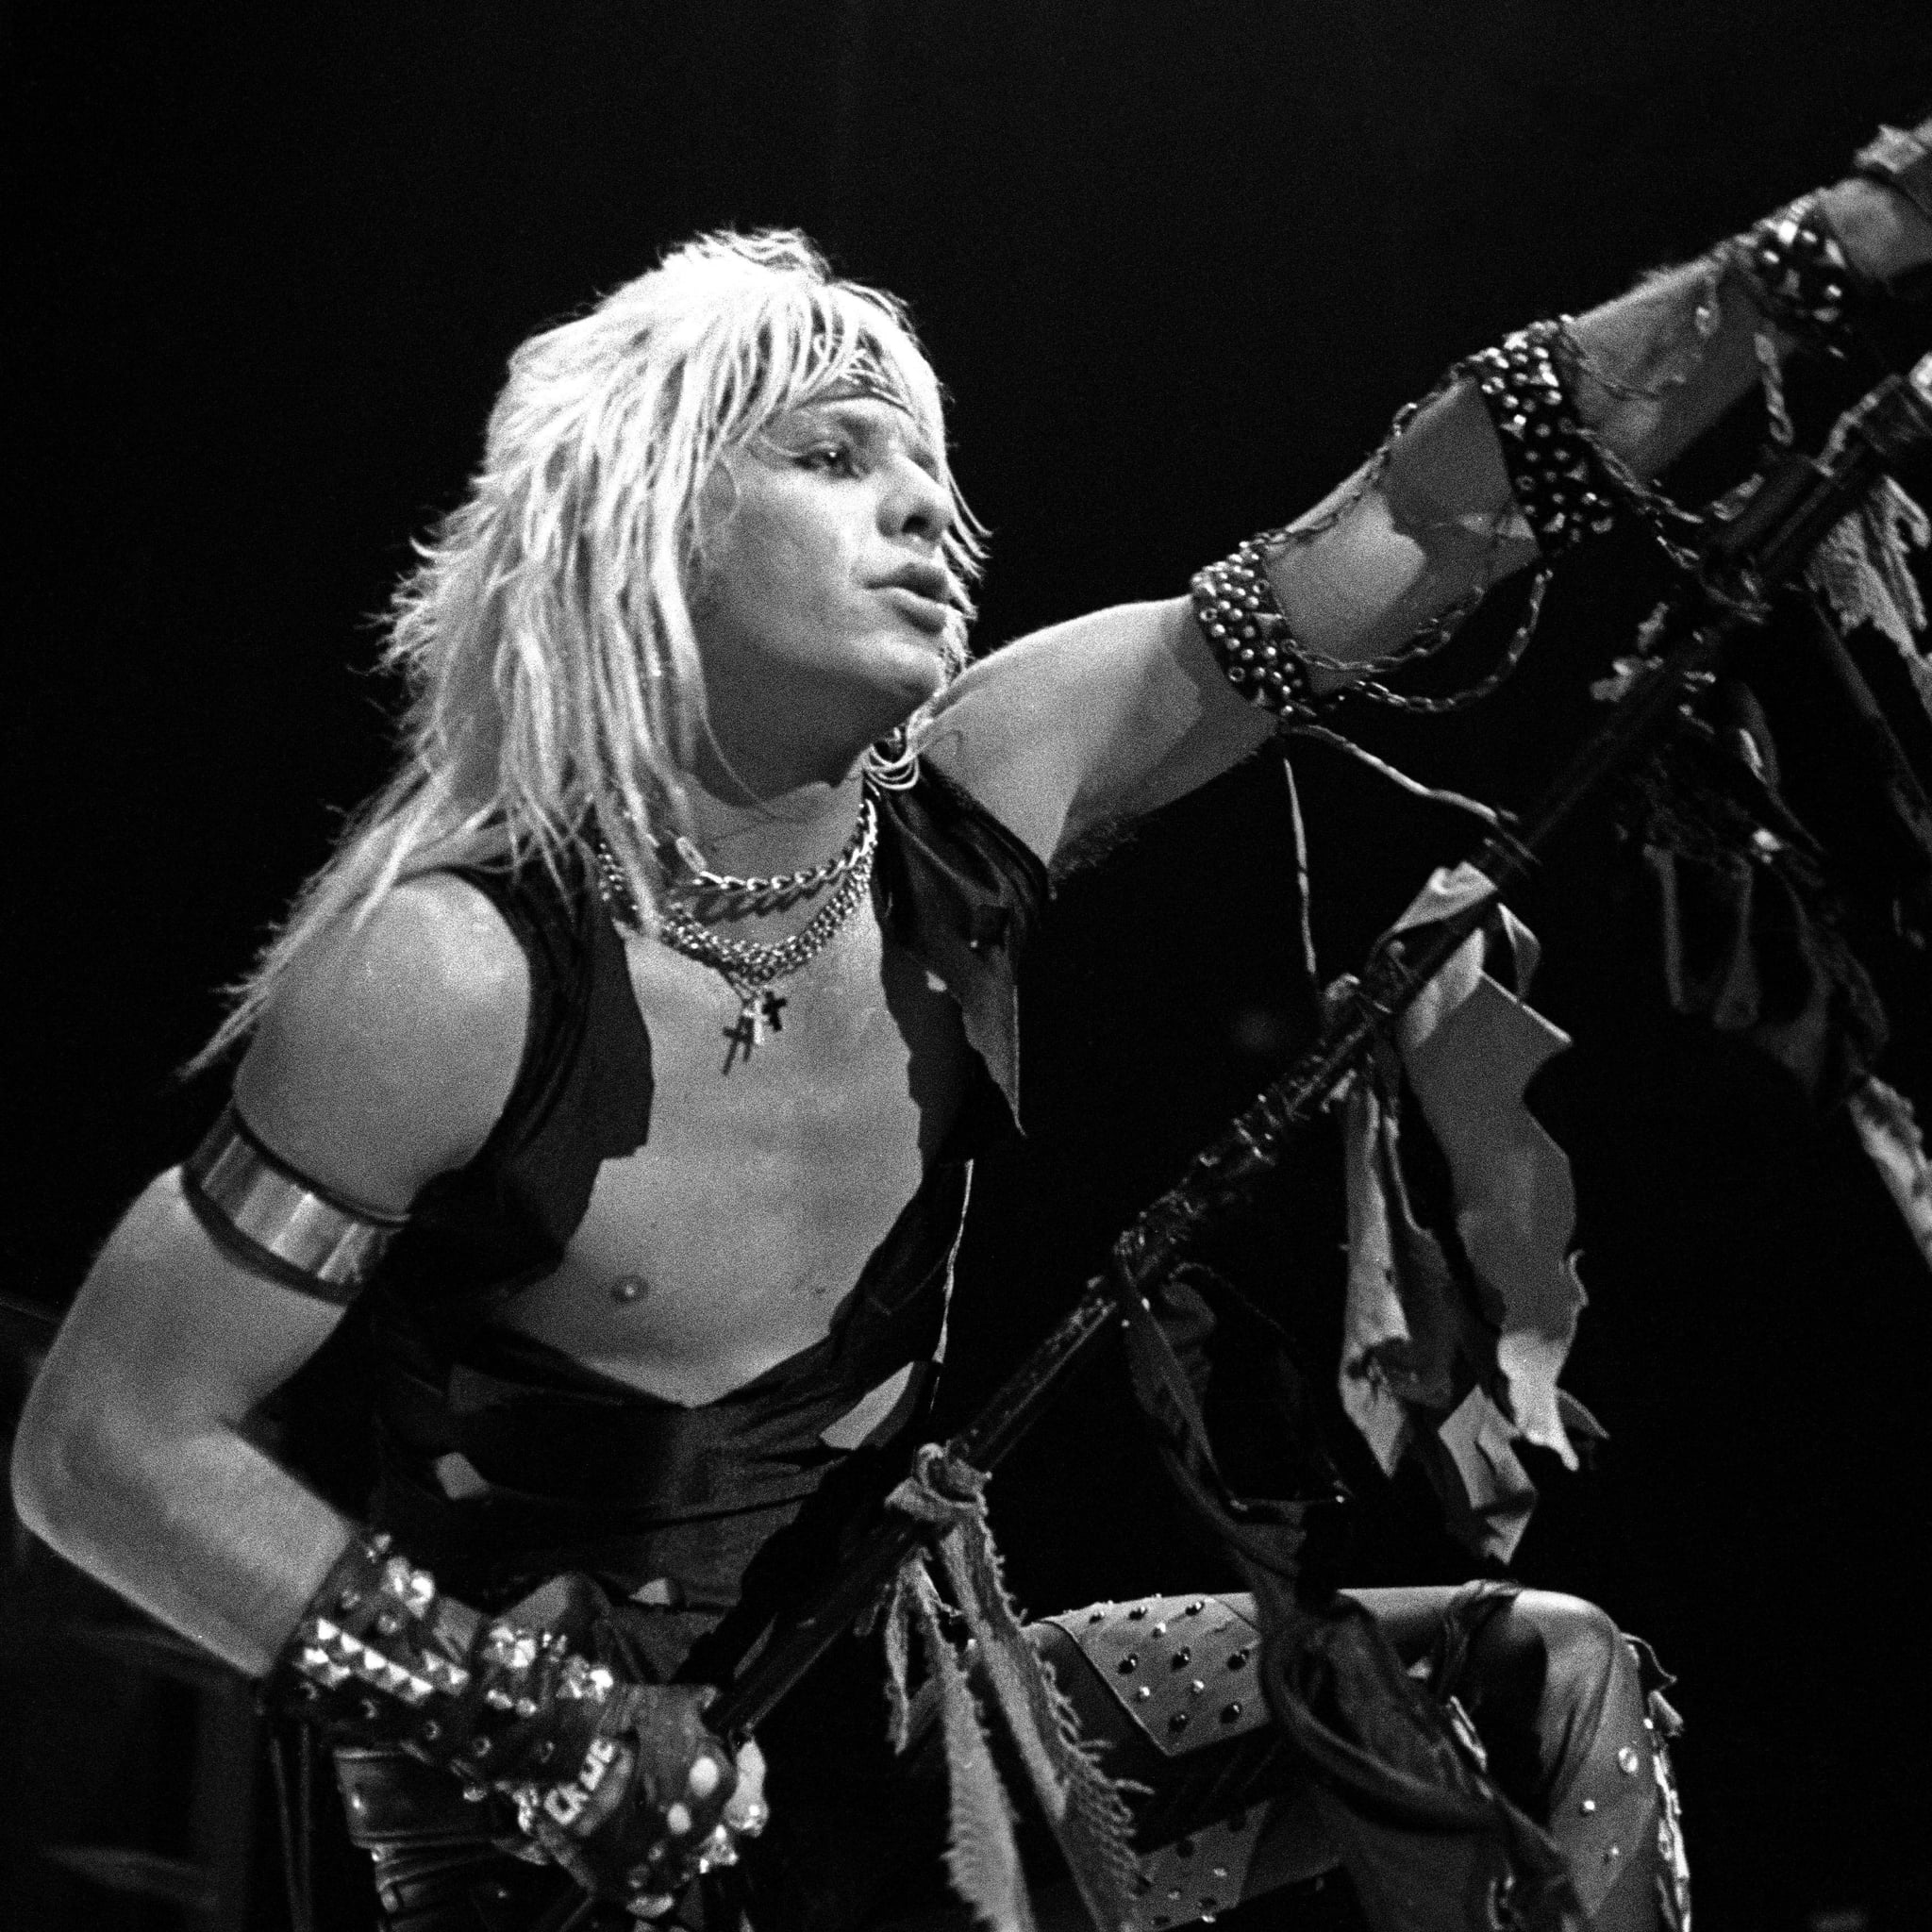 Happy 60th birthday to Vince Neil - lead singer of Motley Crue.   